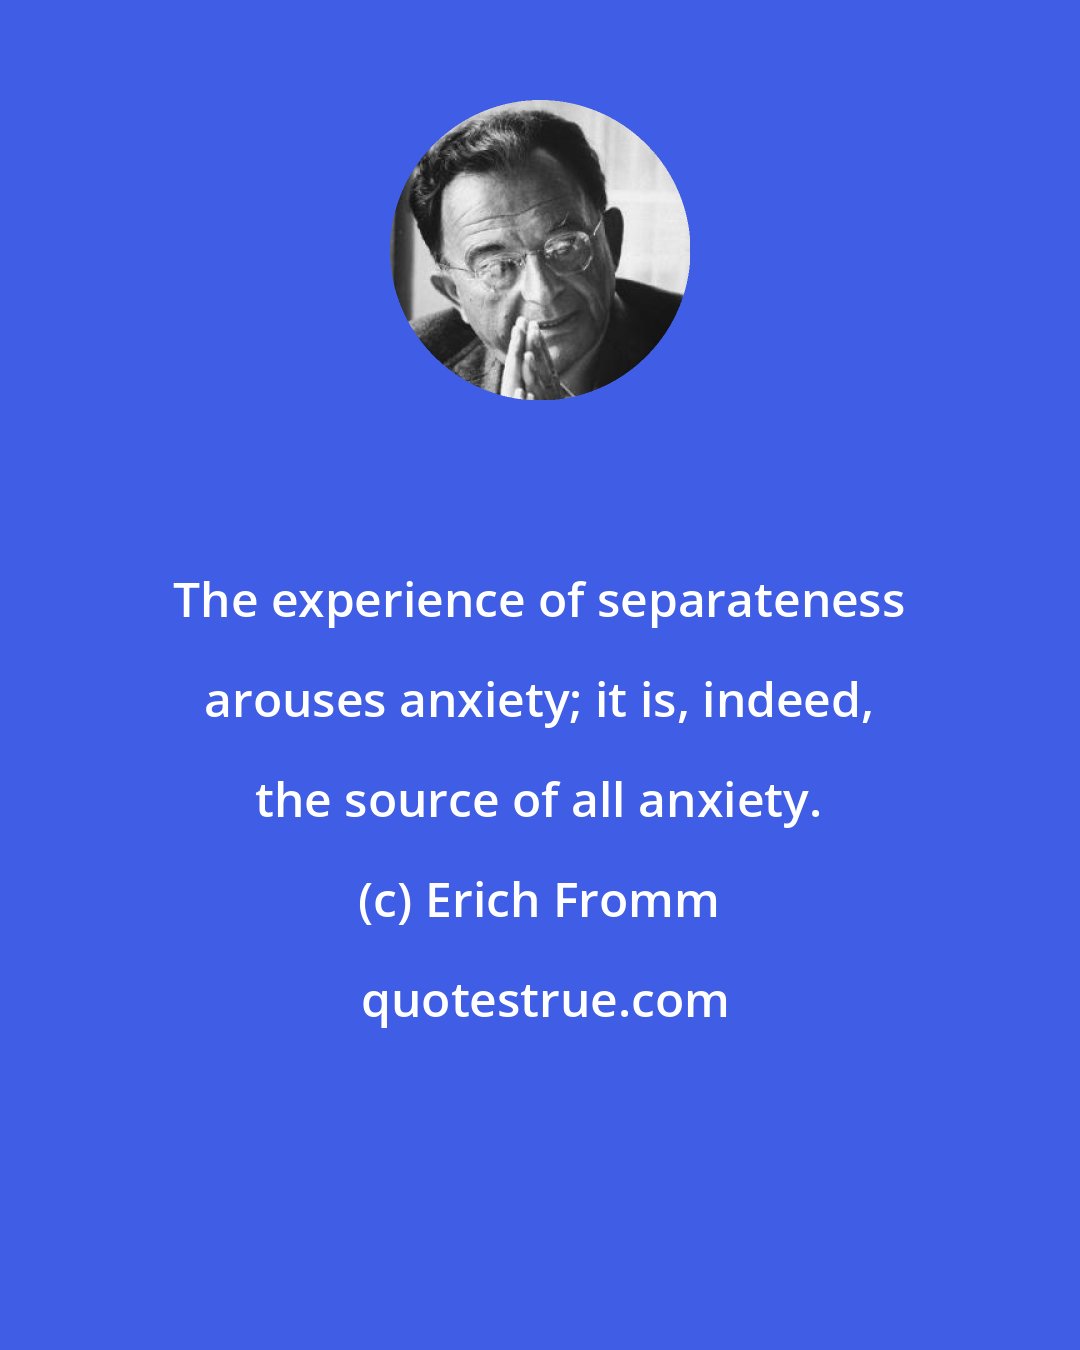 Erich Fromm: The experience of separateness arouses anxiety; it is, indeed, the source of all anxiety.